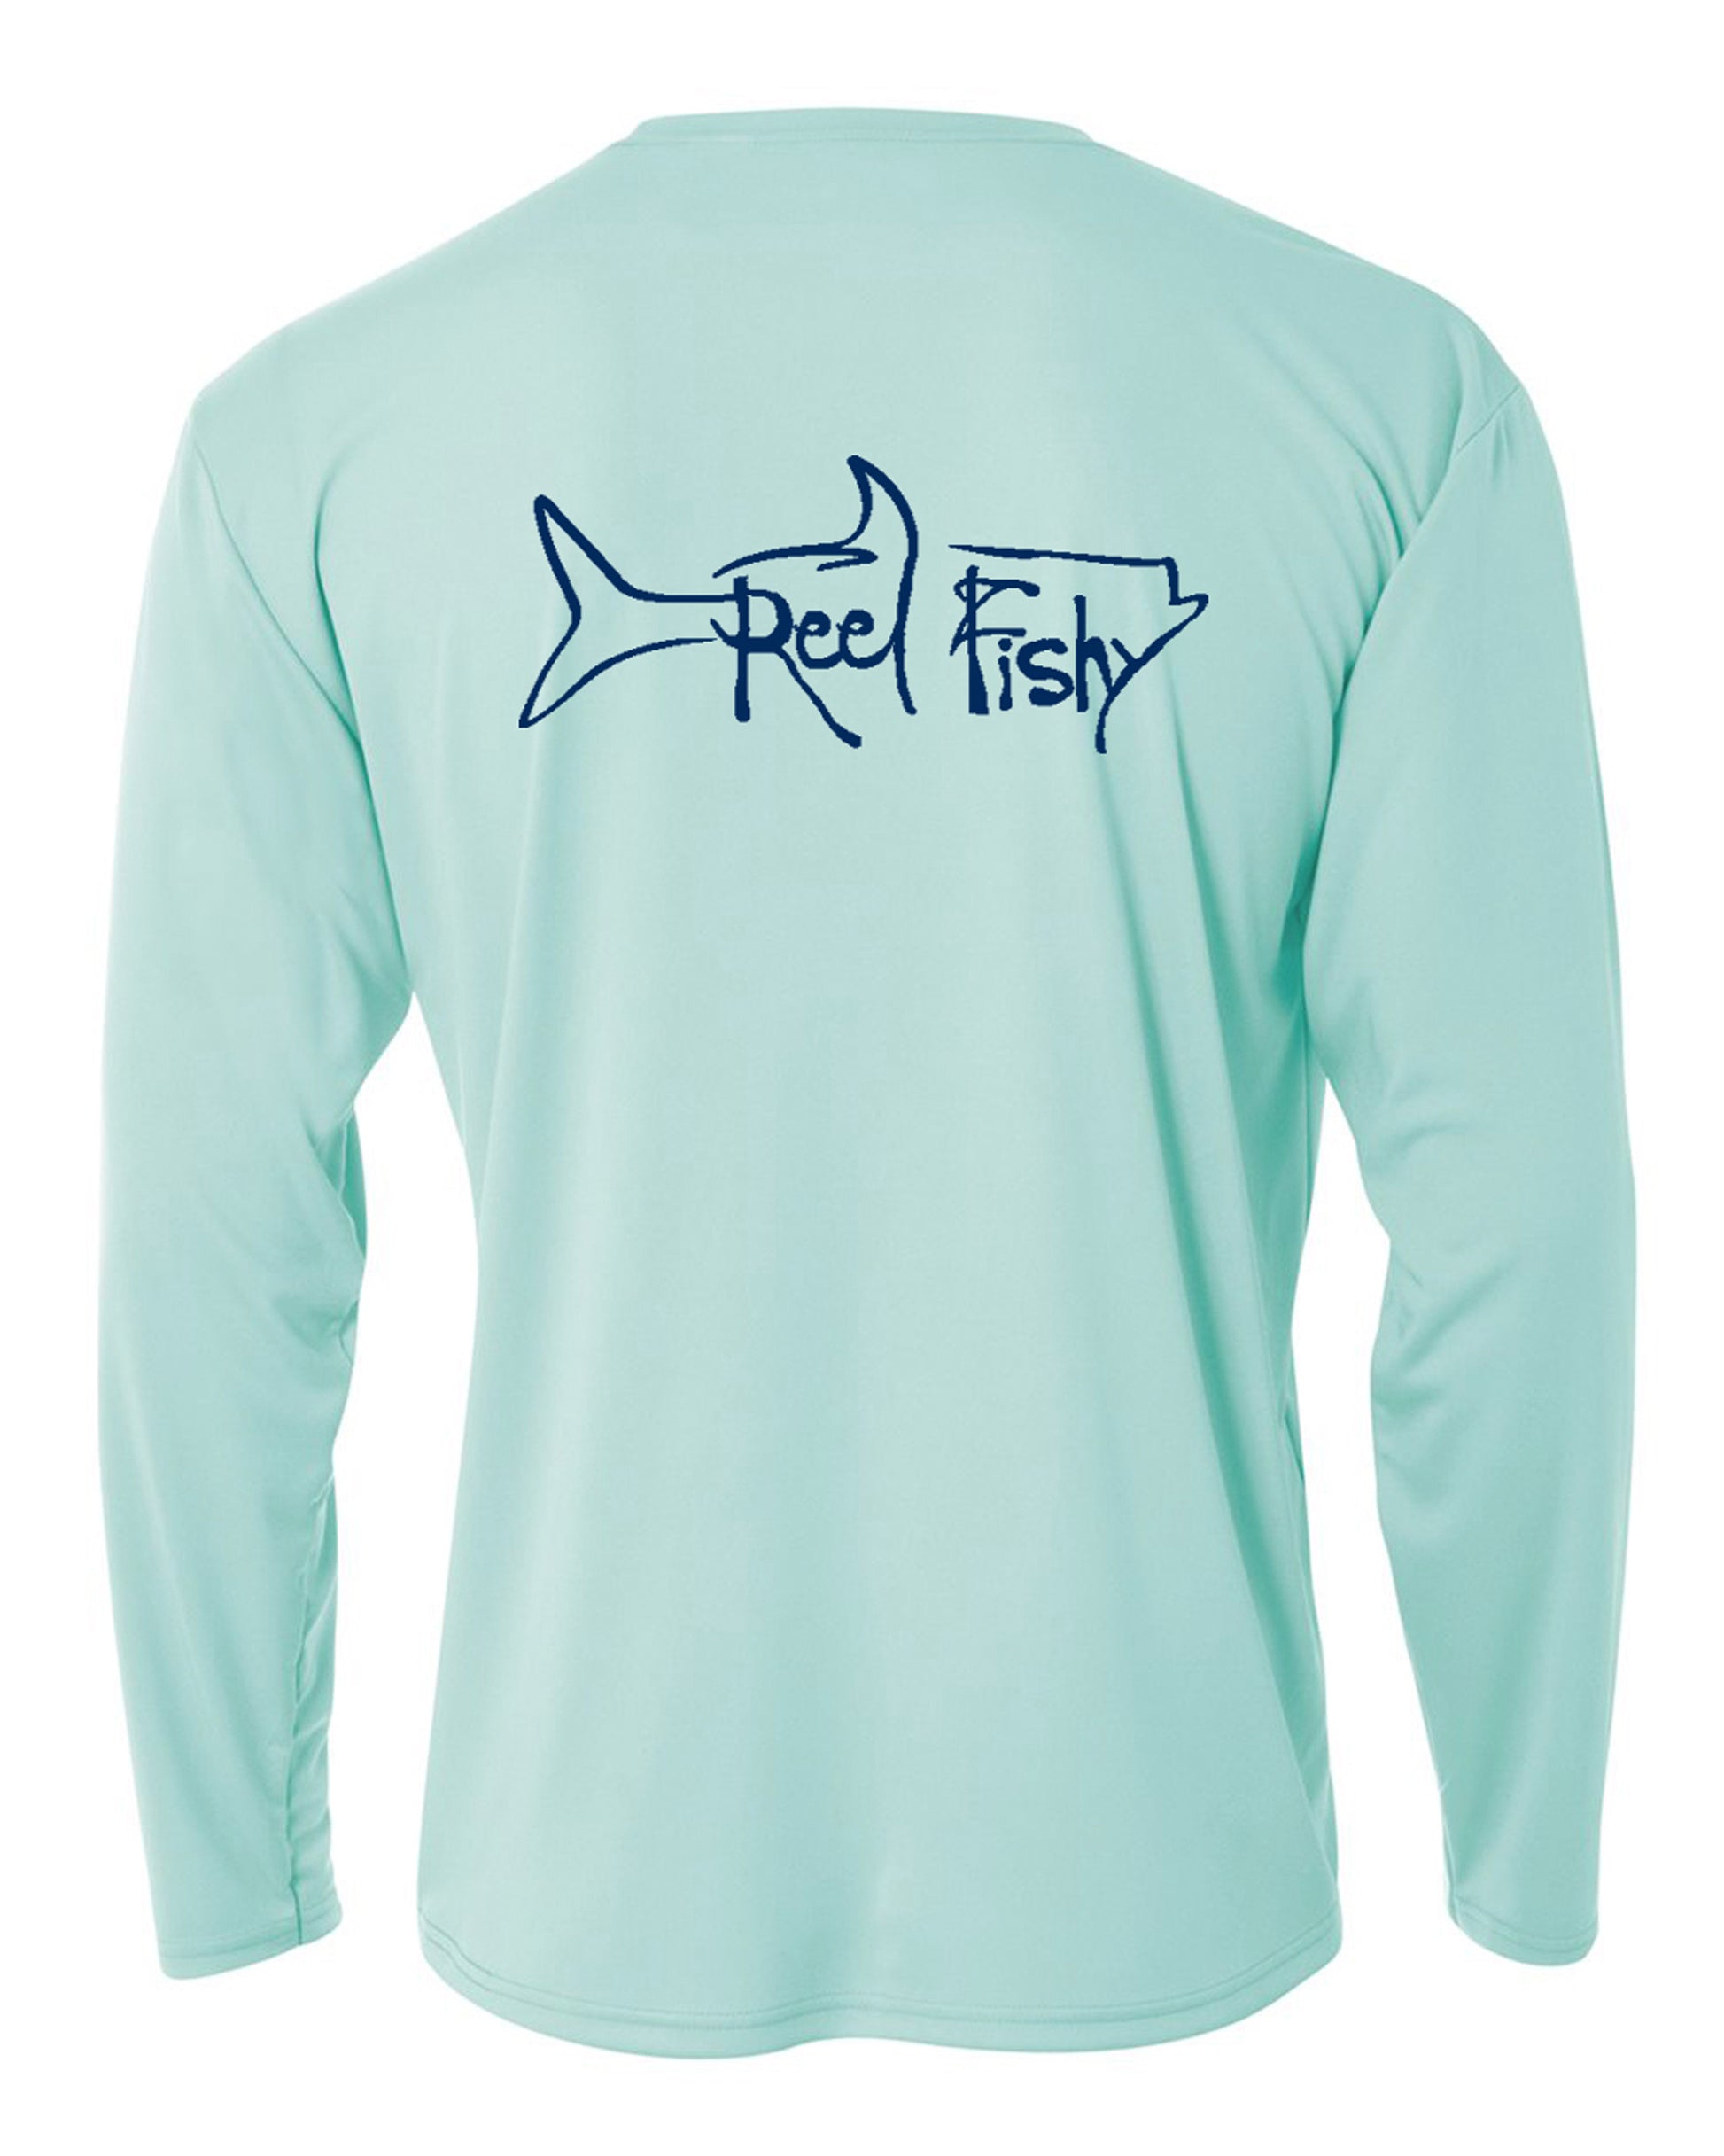 Youth Performance Dry-Fit Tarpon Fishing Shirts with Sun Protection by Reel Fishy Apparel - Long Sleeve Seagrass